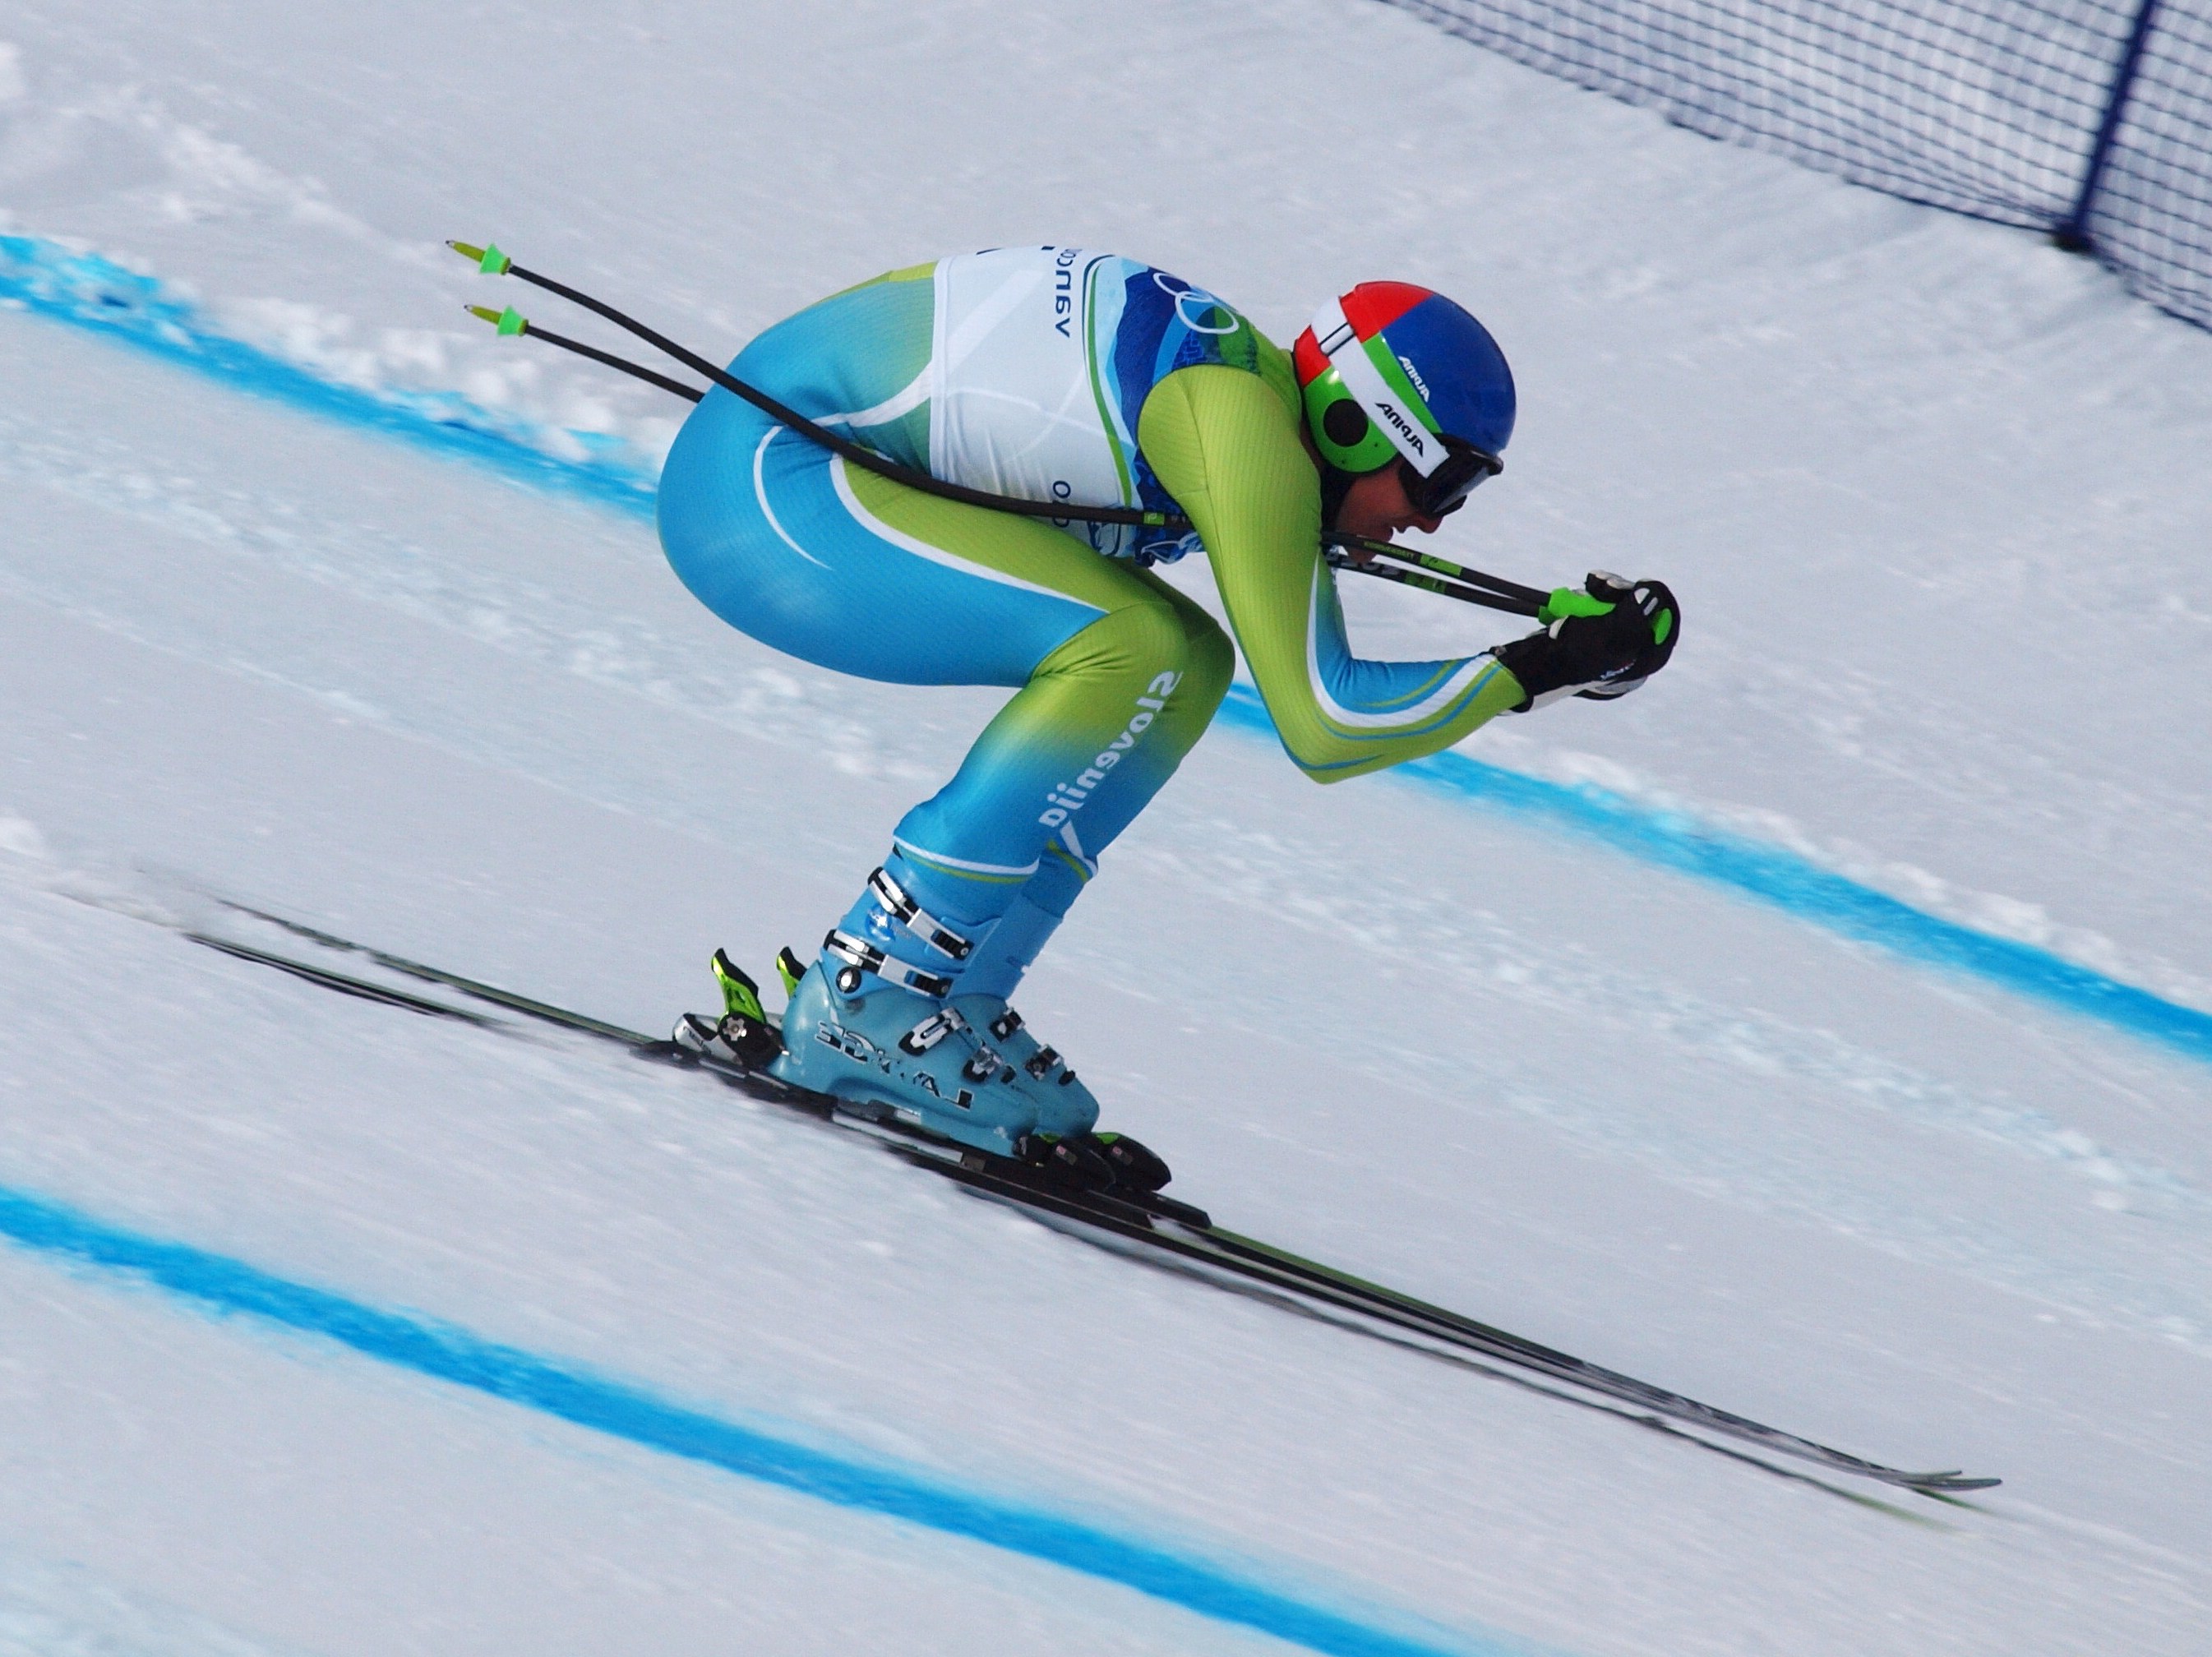 Olympic skier tucked as he races downhill.